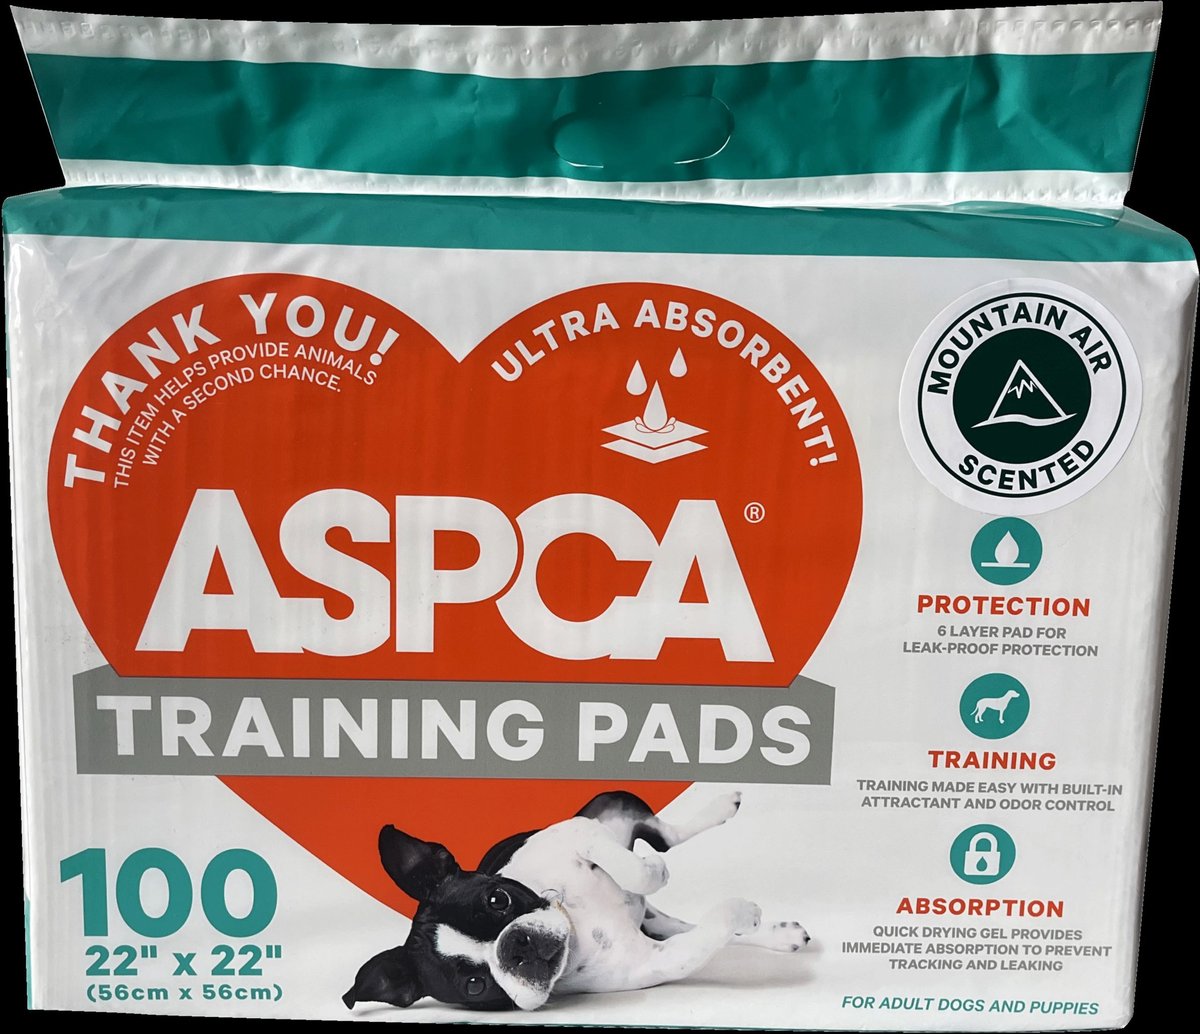 Ultra Absorbent Odor Control Scented Training Pads For Dogs Leak-proof  Quick Dry Gel – 22 x 22 Puppy Pads - Fresh Scented - Pack of 150